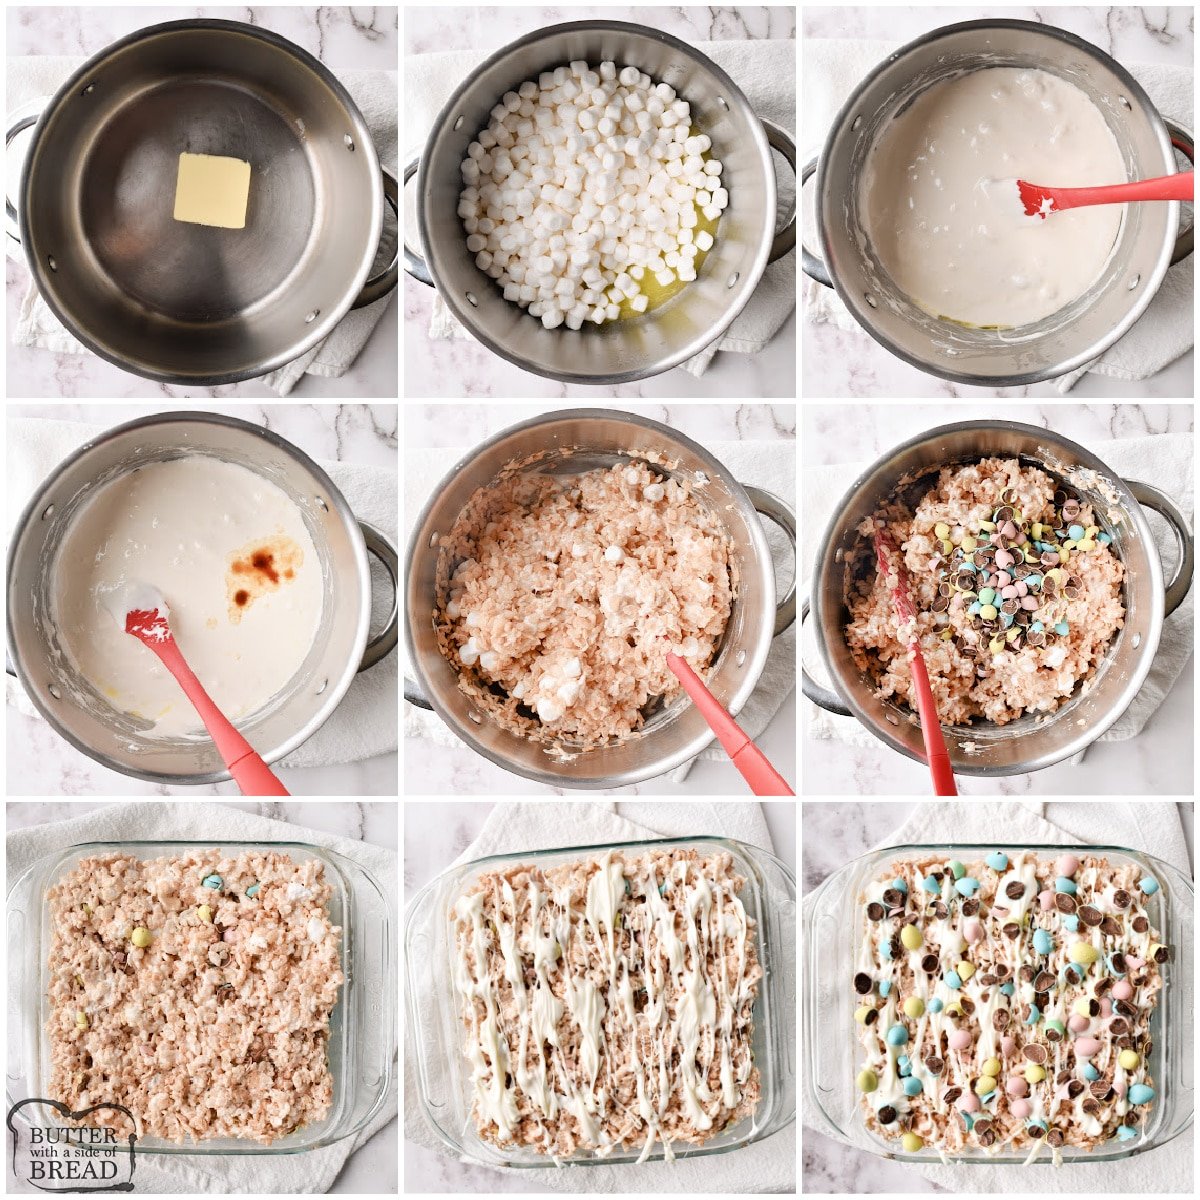 Step by step instructions on how to make mini egg rice krispie treats